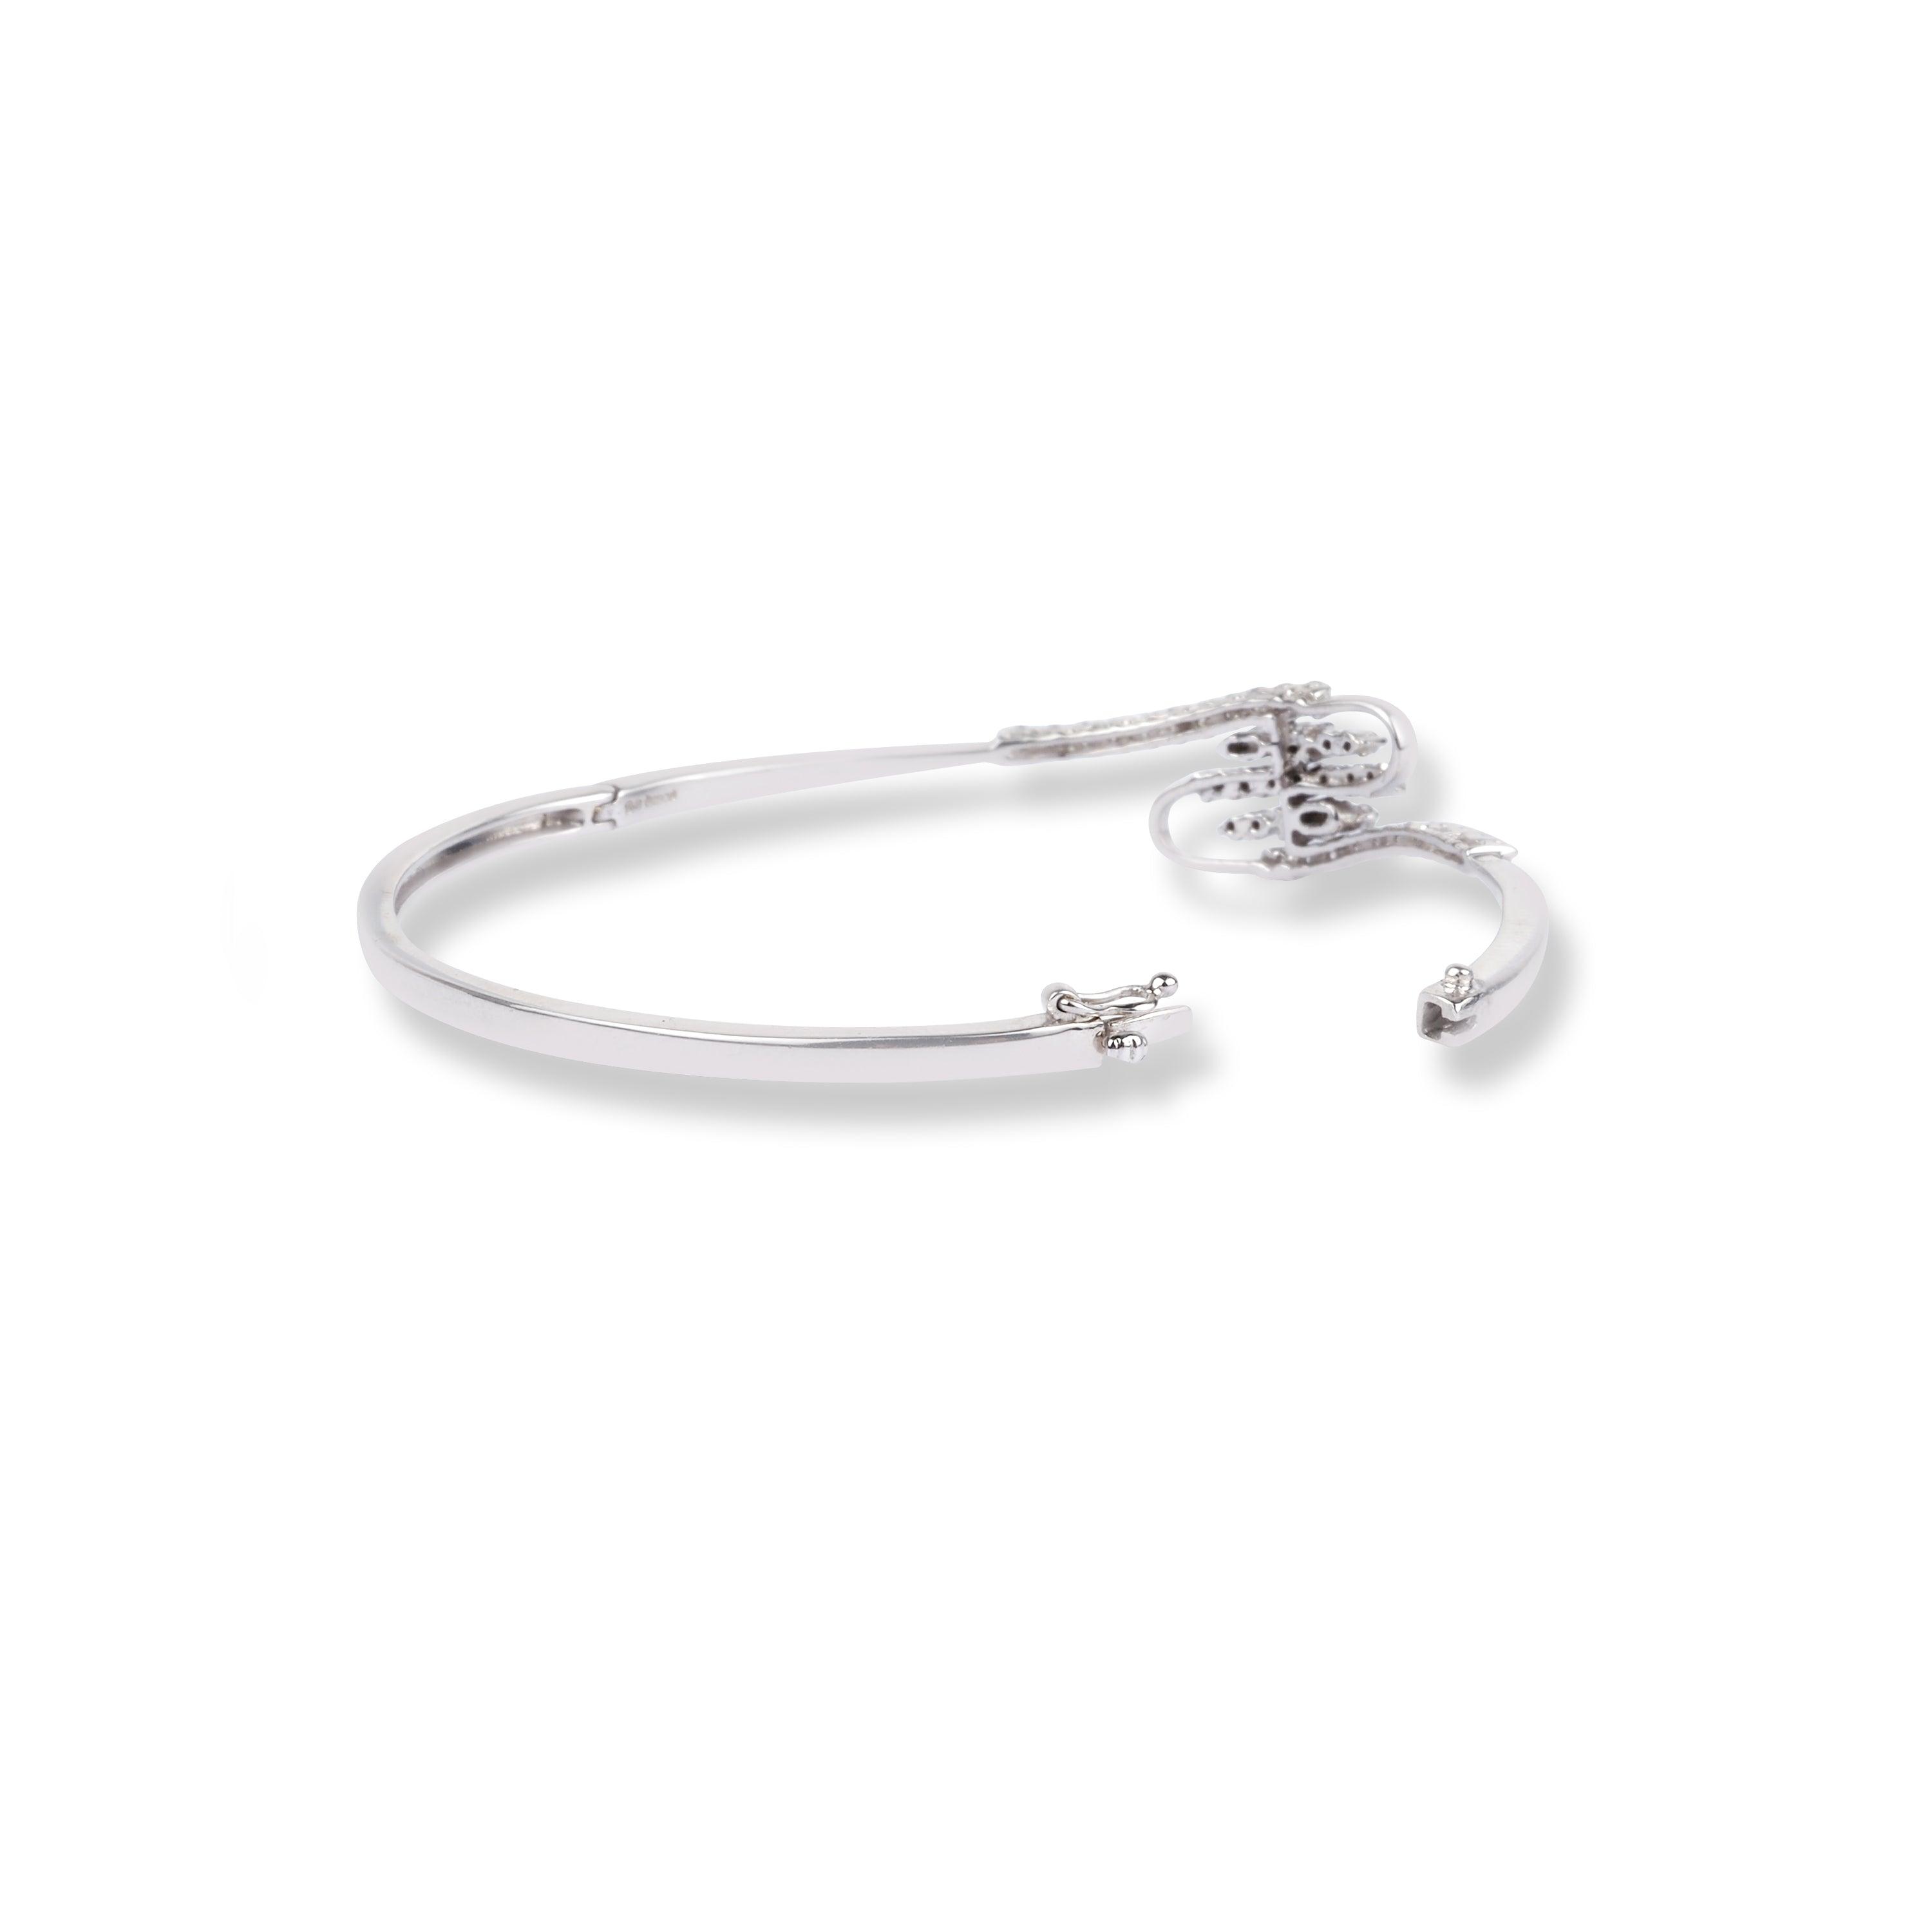 18ct White Gold Openable Bangle with Cubic Zirconia Stones LR13001 - Minar Jewellers